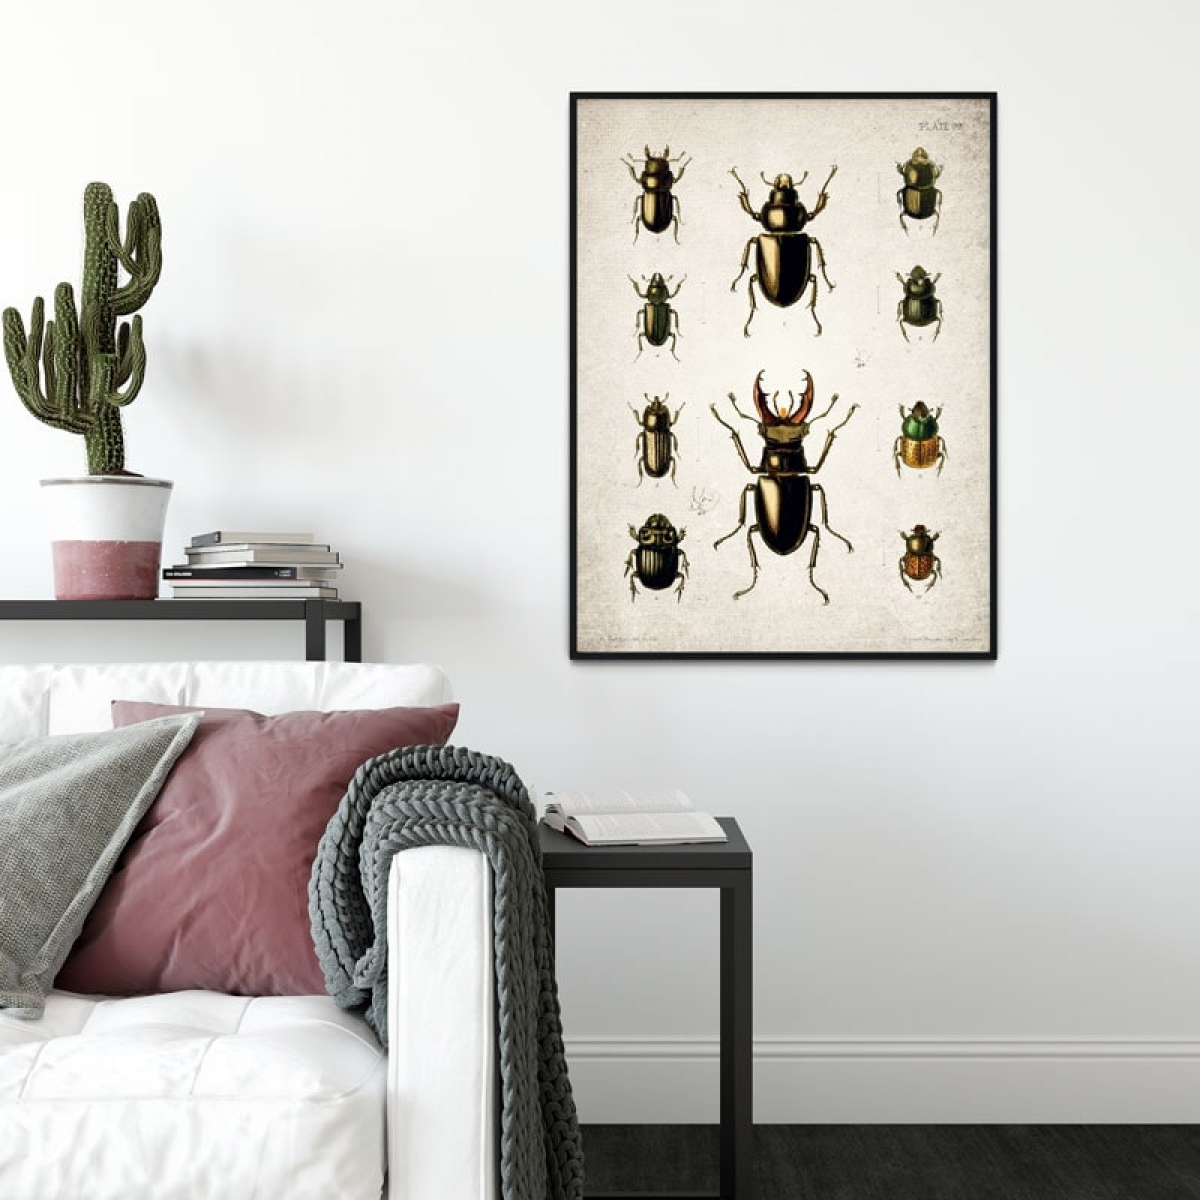 Vintage Entomology Giclee Print (Beetle Plate From 1867)